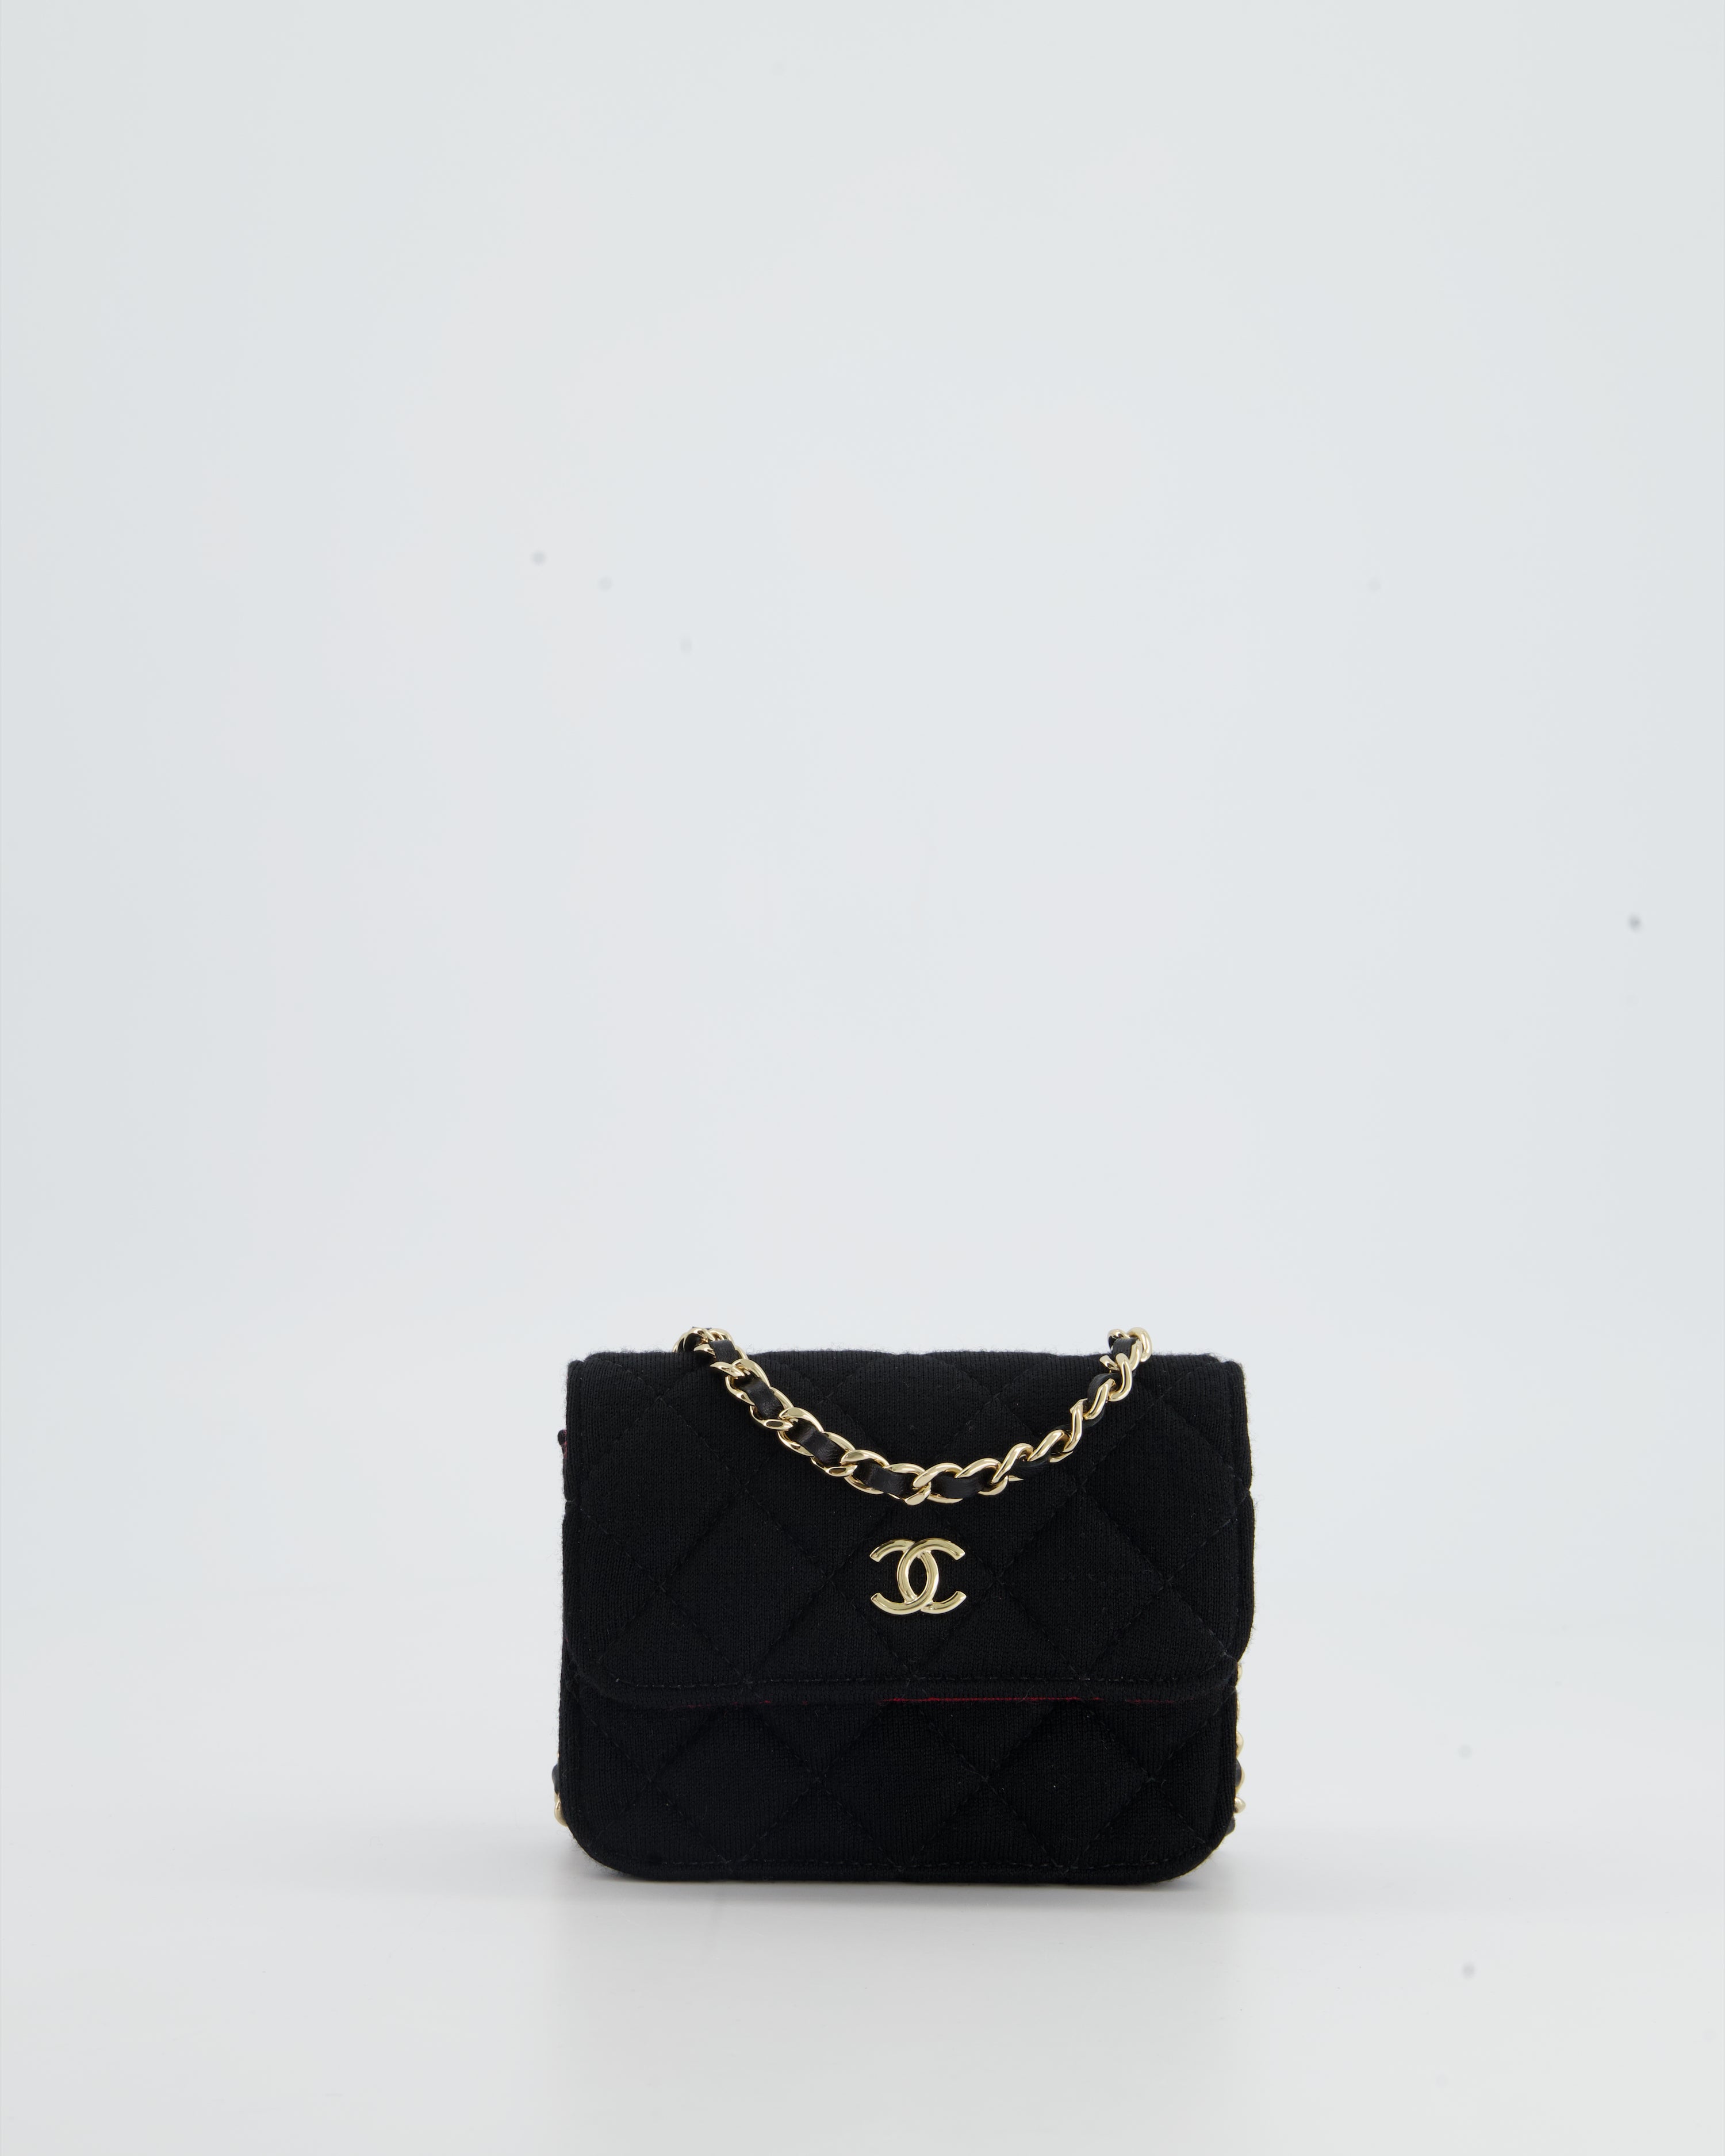 CHANEL, Bags, Chanel Jersey Quilted Micro Mini Flap Bag Black